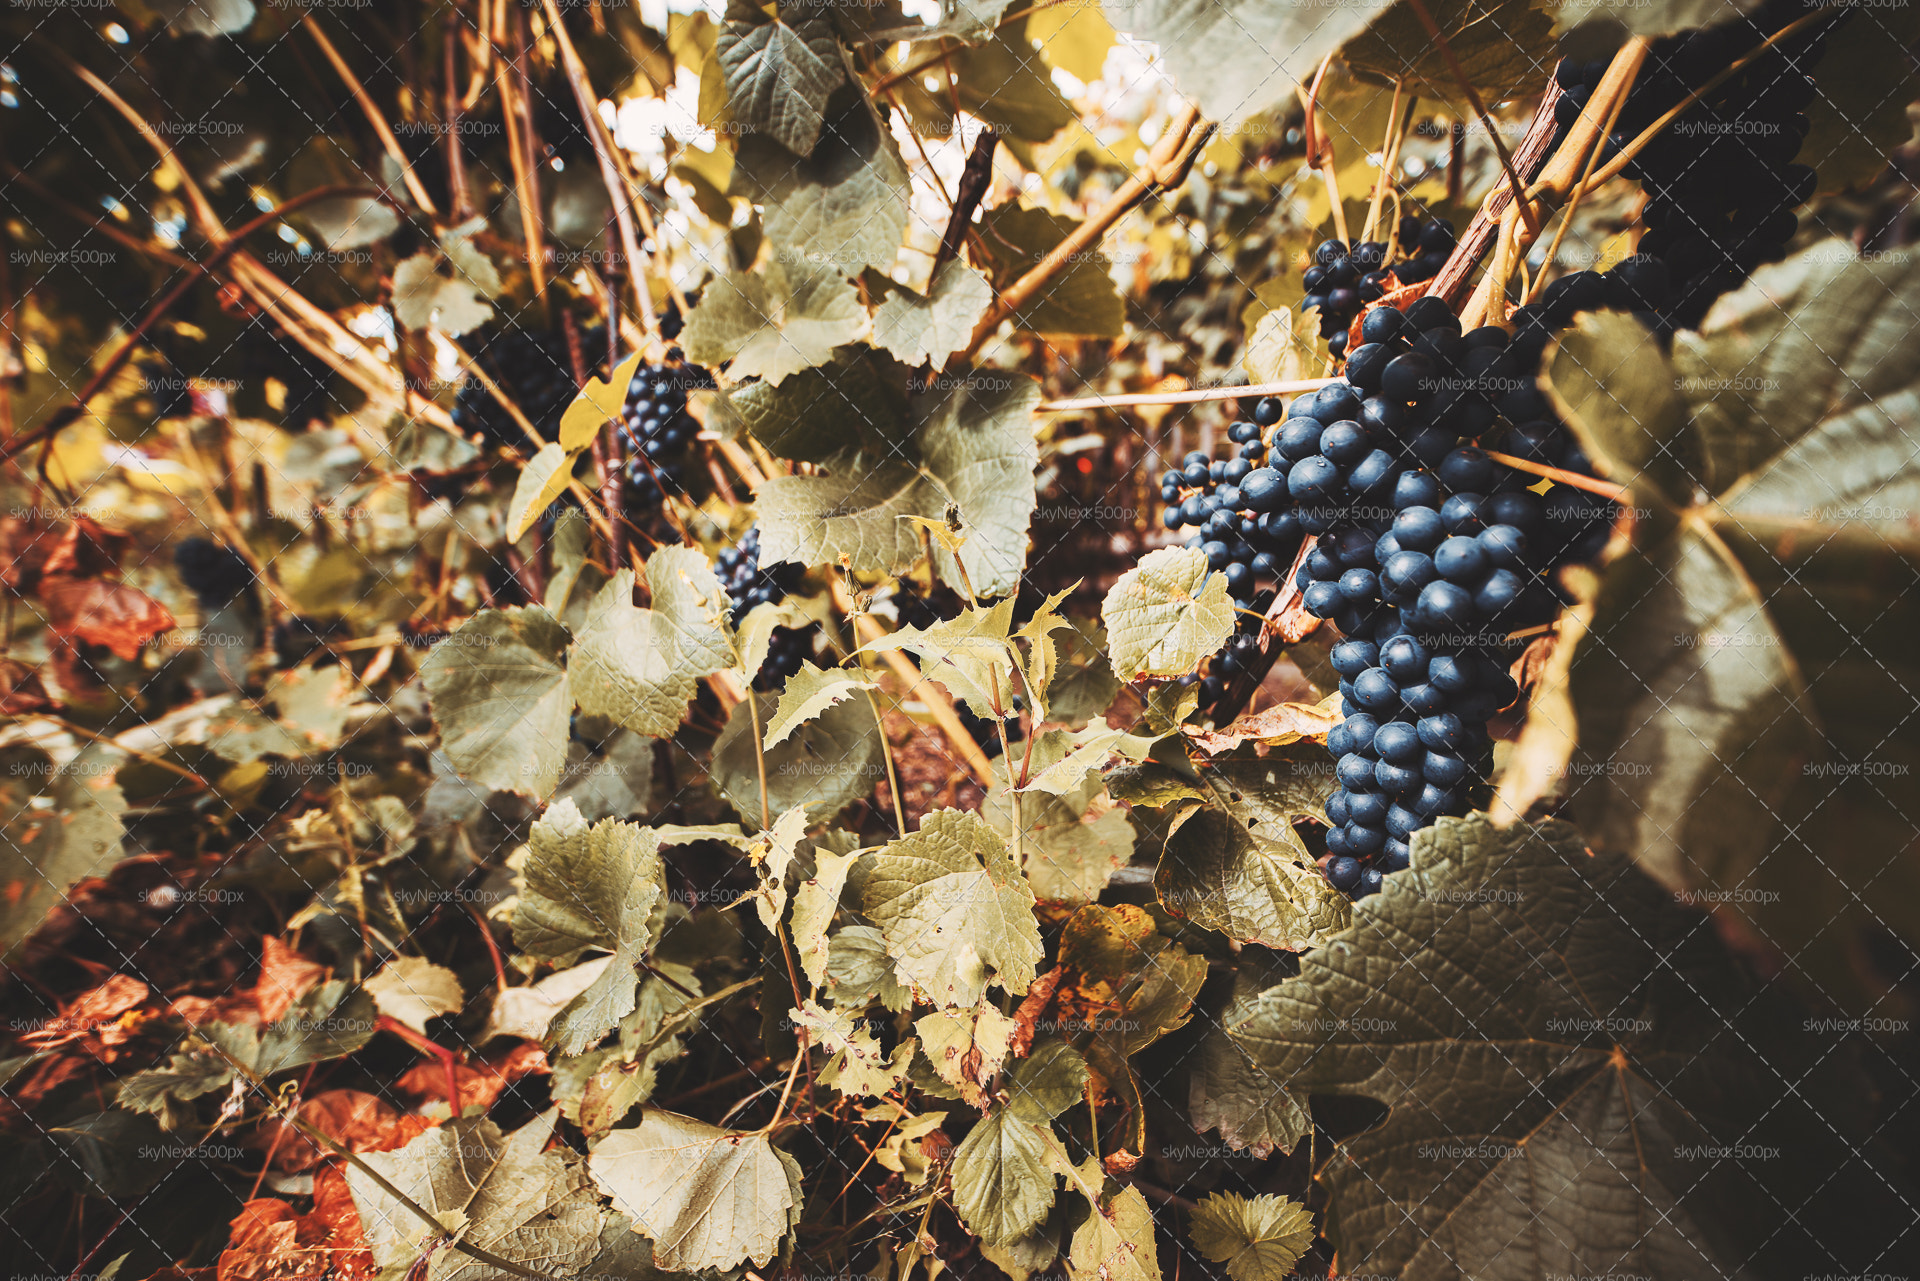 Sony a7R II sample photo. Wide angle shot of bunches of grapes photography